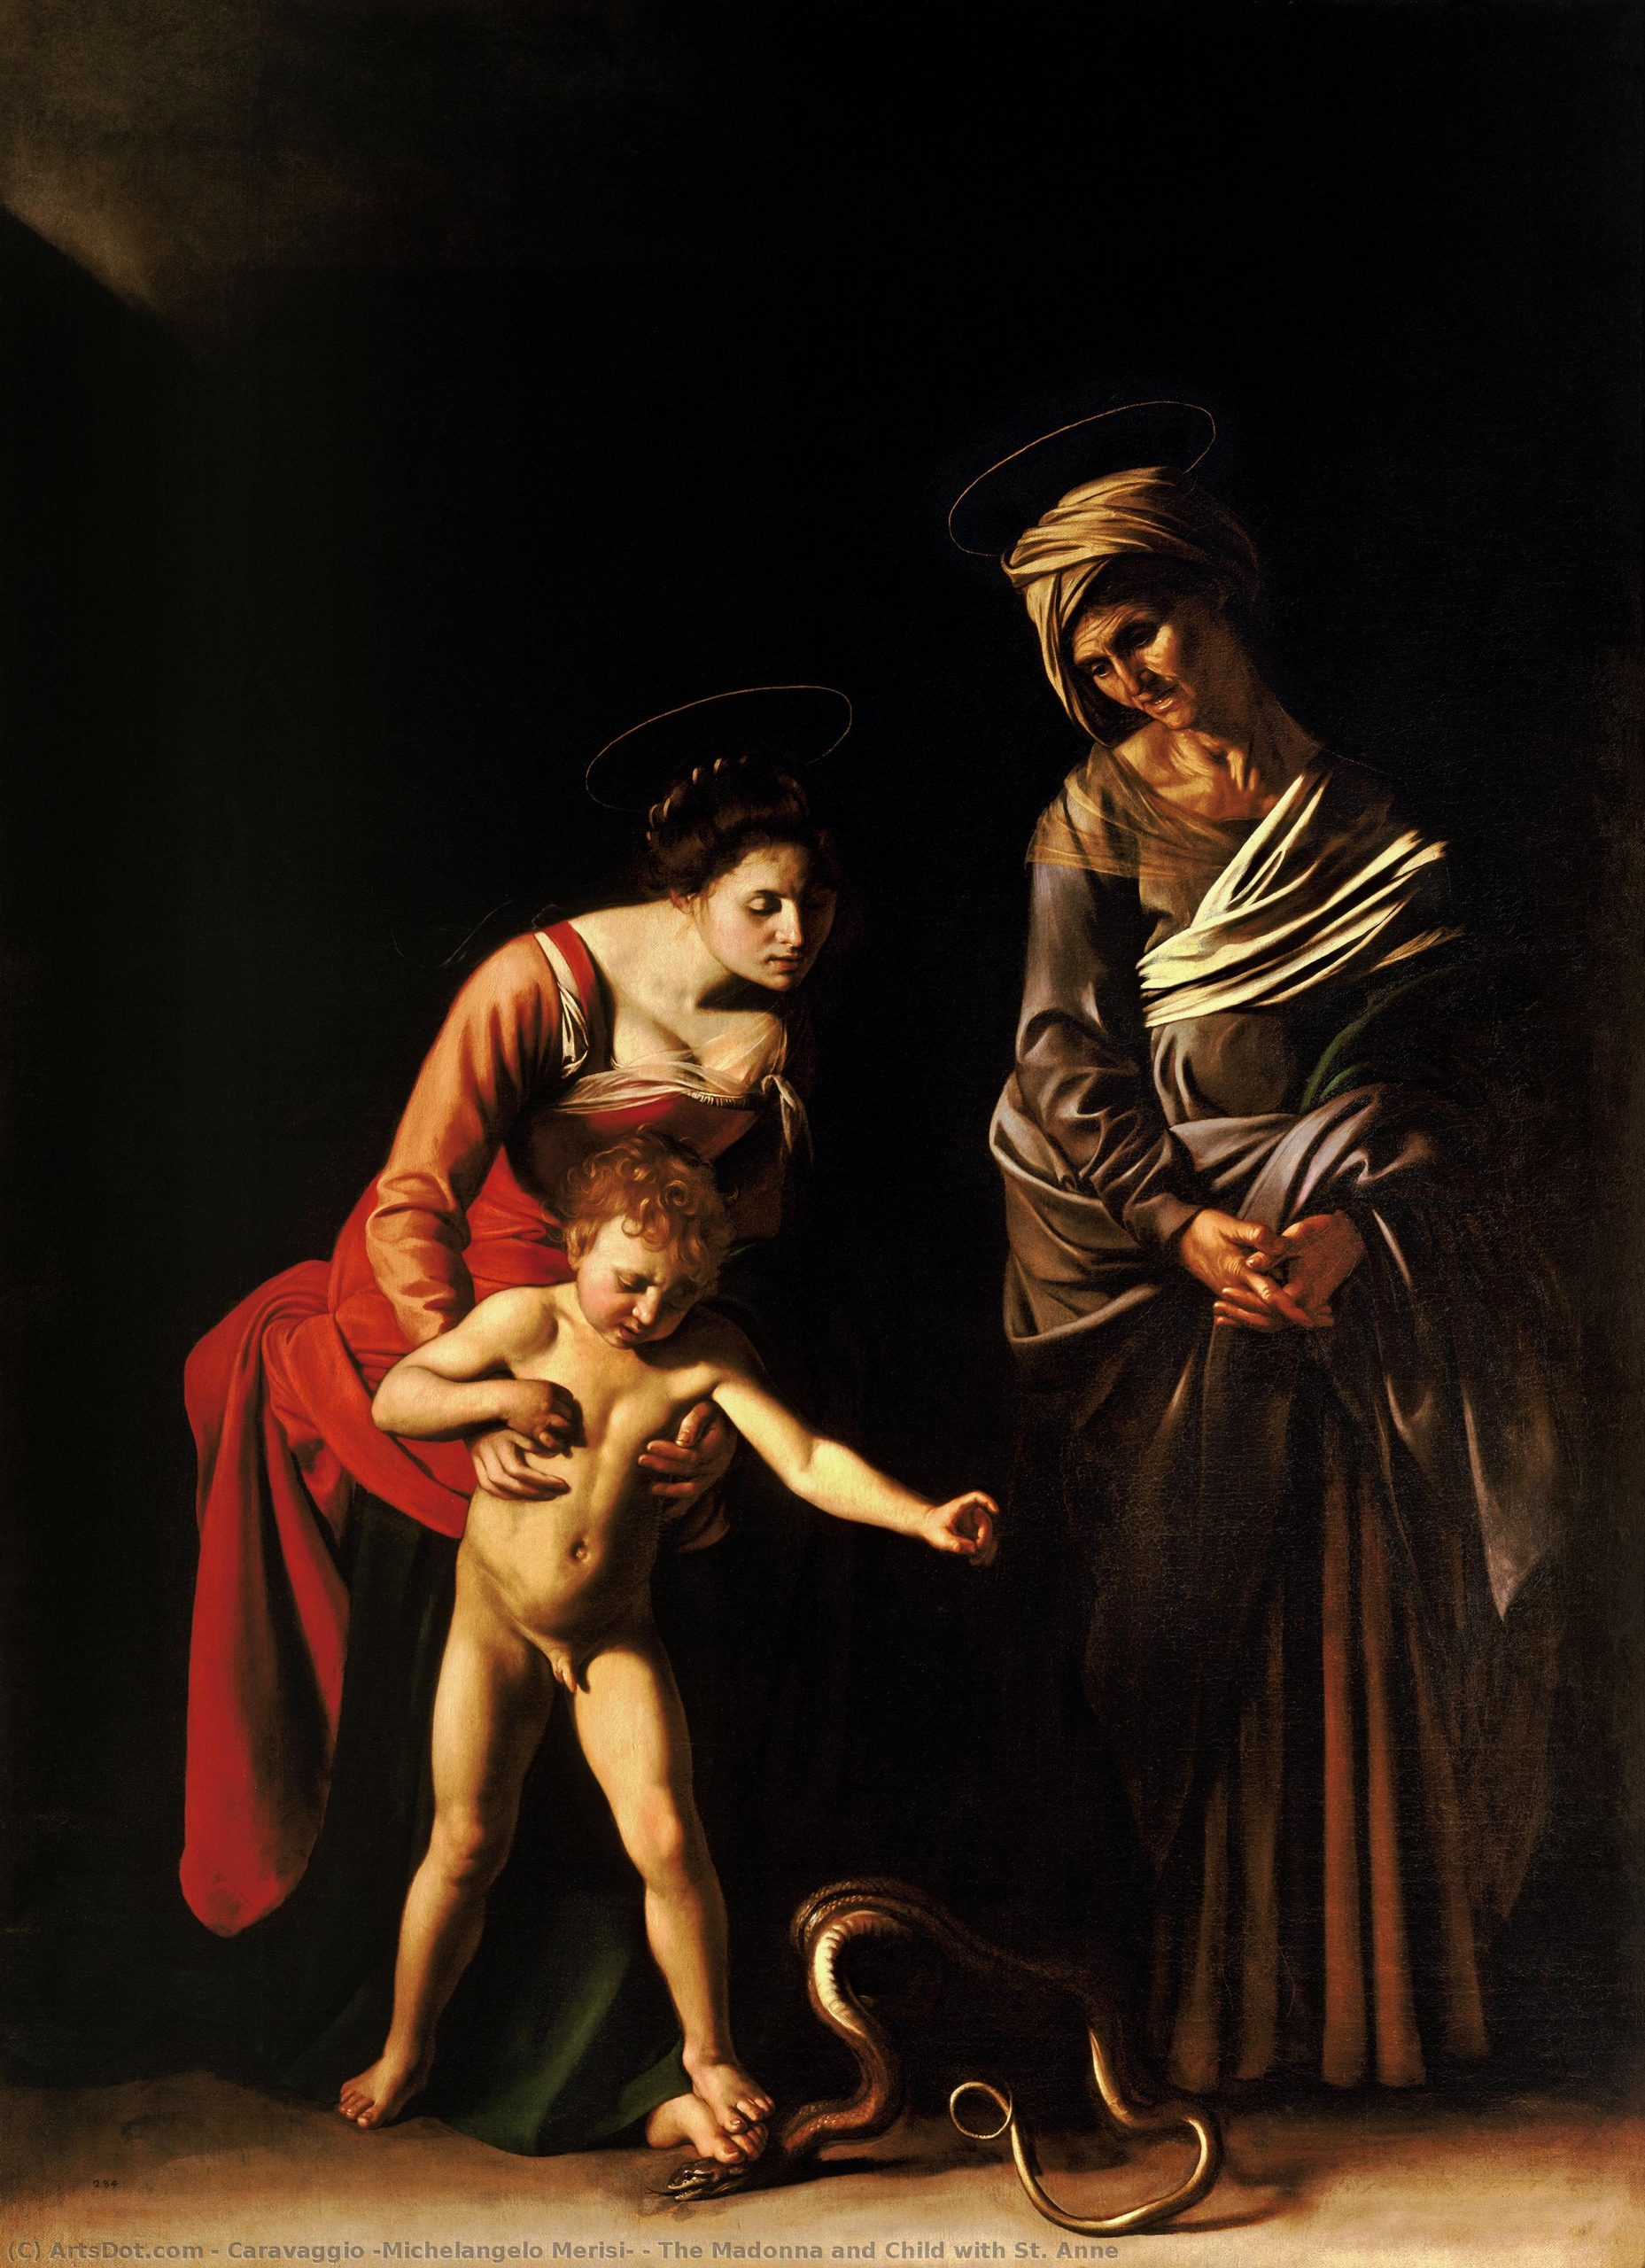 Caravaggio michelangelo merisi the madonna and child with st. anne